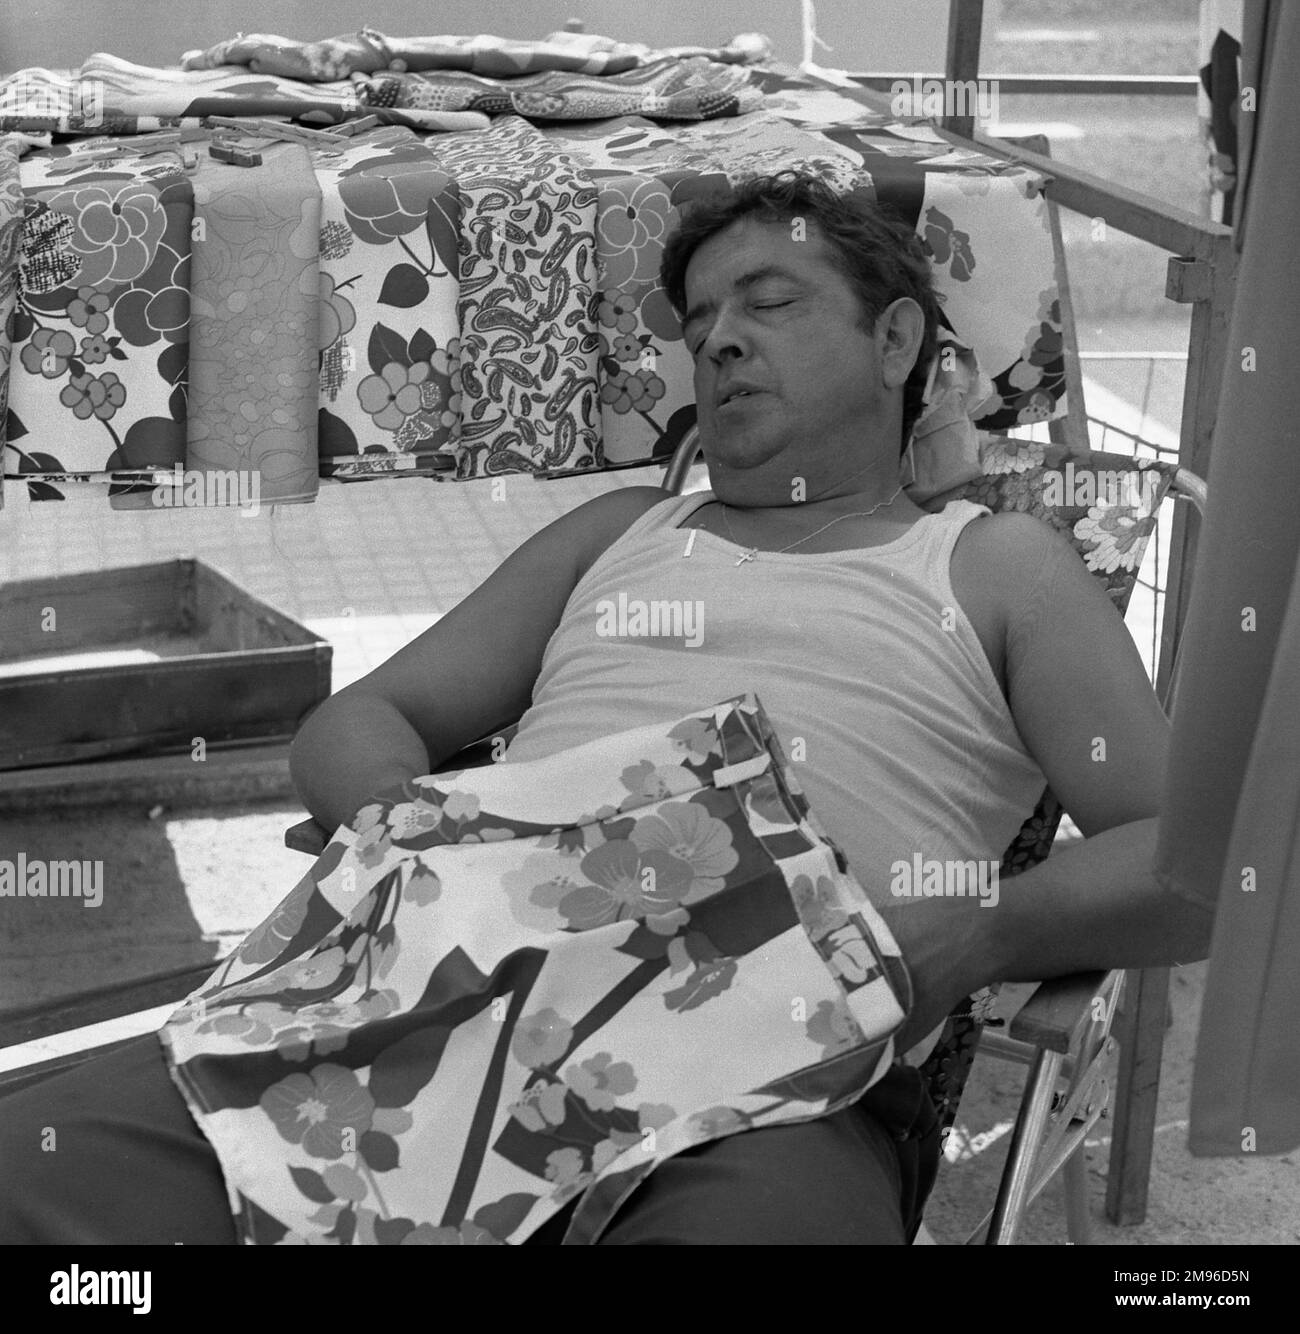 A man in a white vest sleeps in a chair, partially covered by some flowery patterned material.  Similar material covers a nearby table, possibly belonging to a street market. Stock Photo